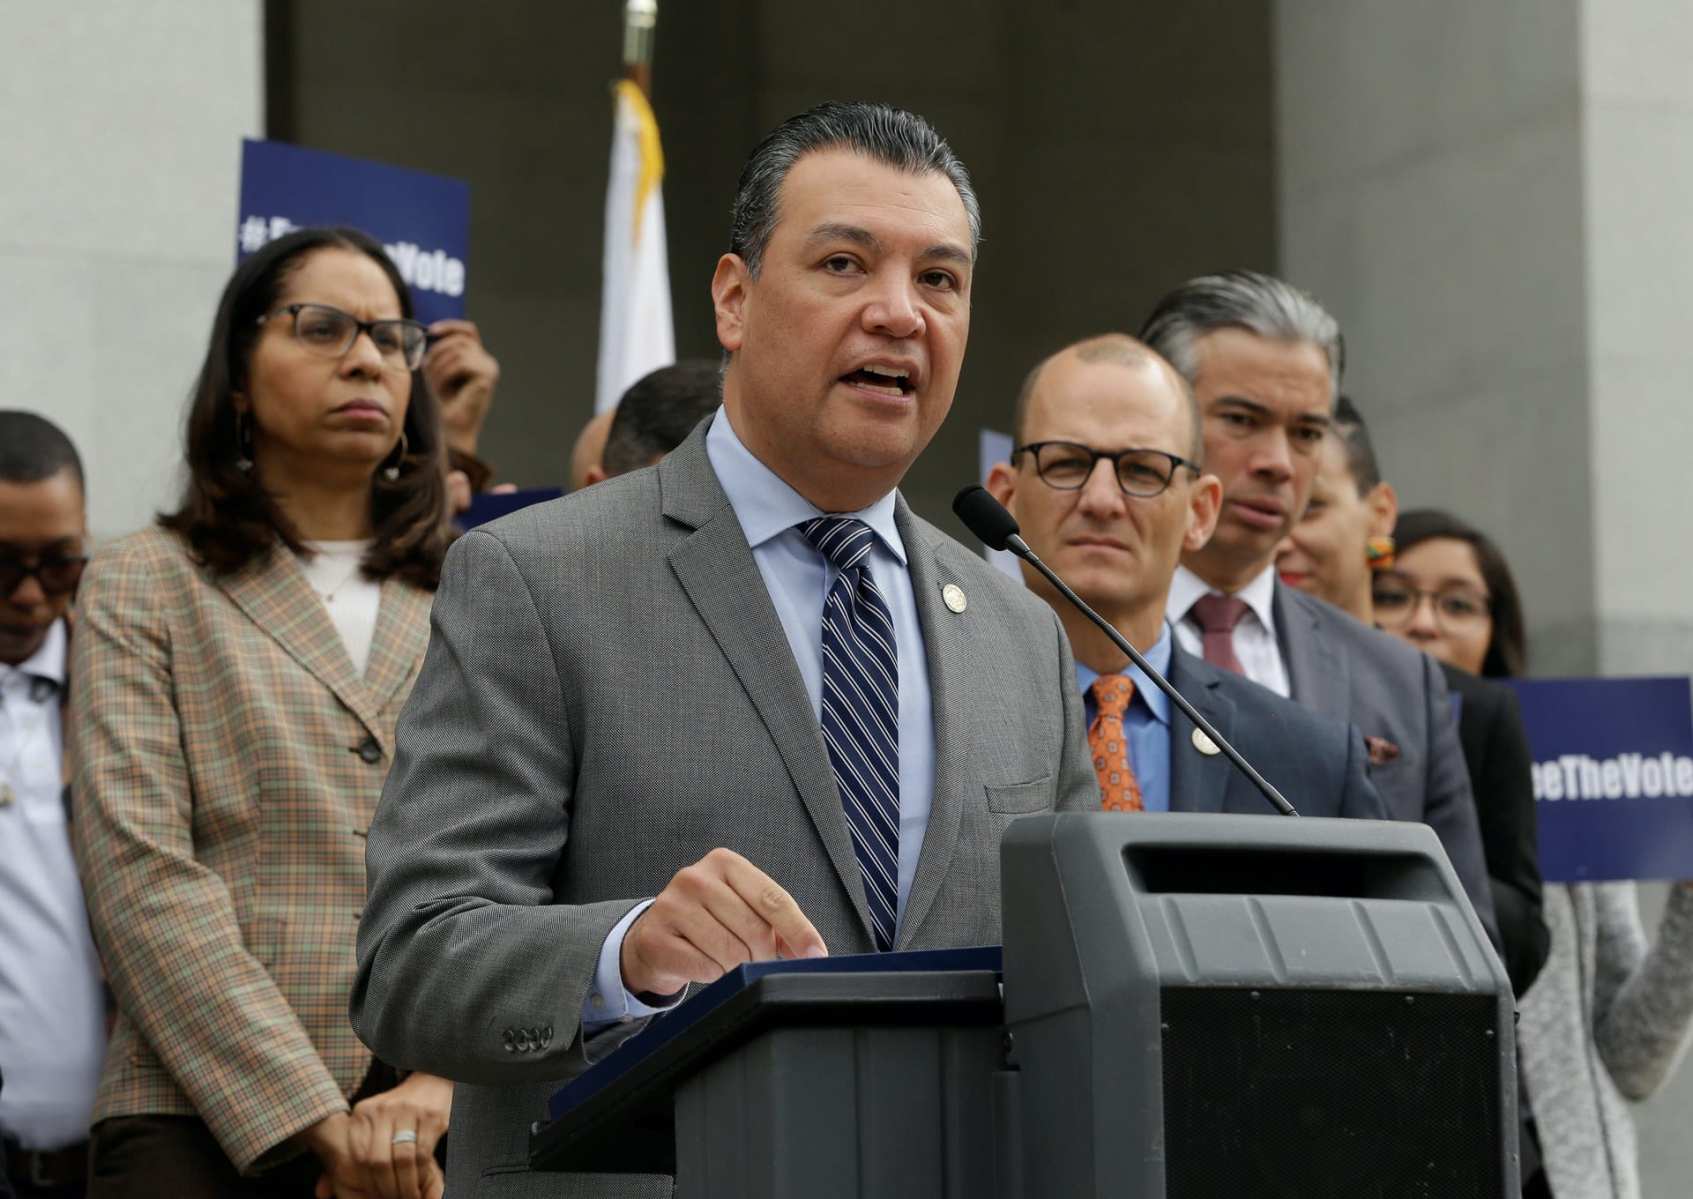 Alex Padilla stands at a podium and speaks into a microphone.